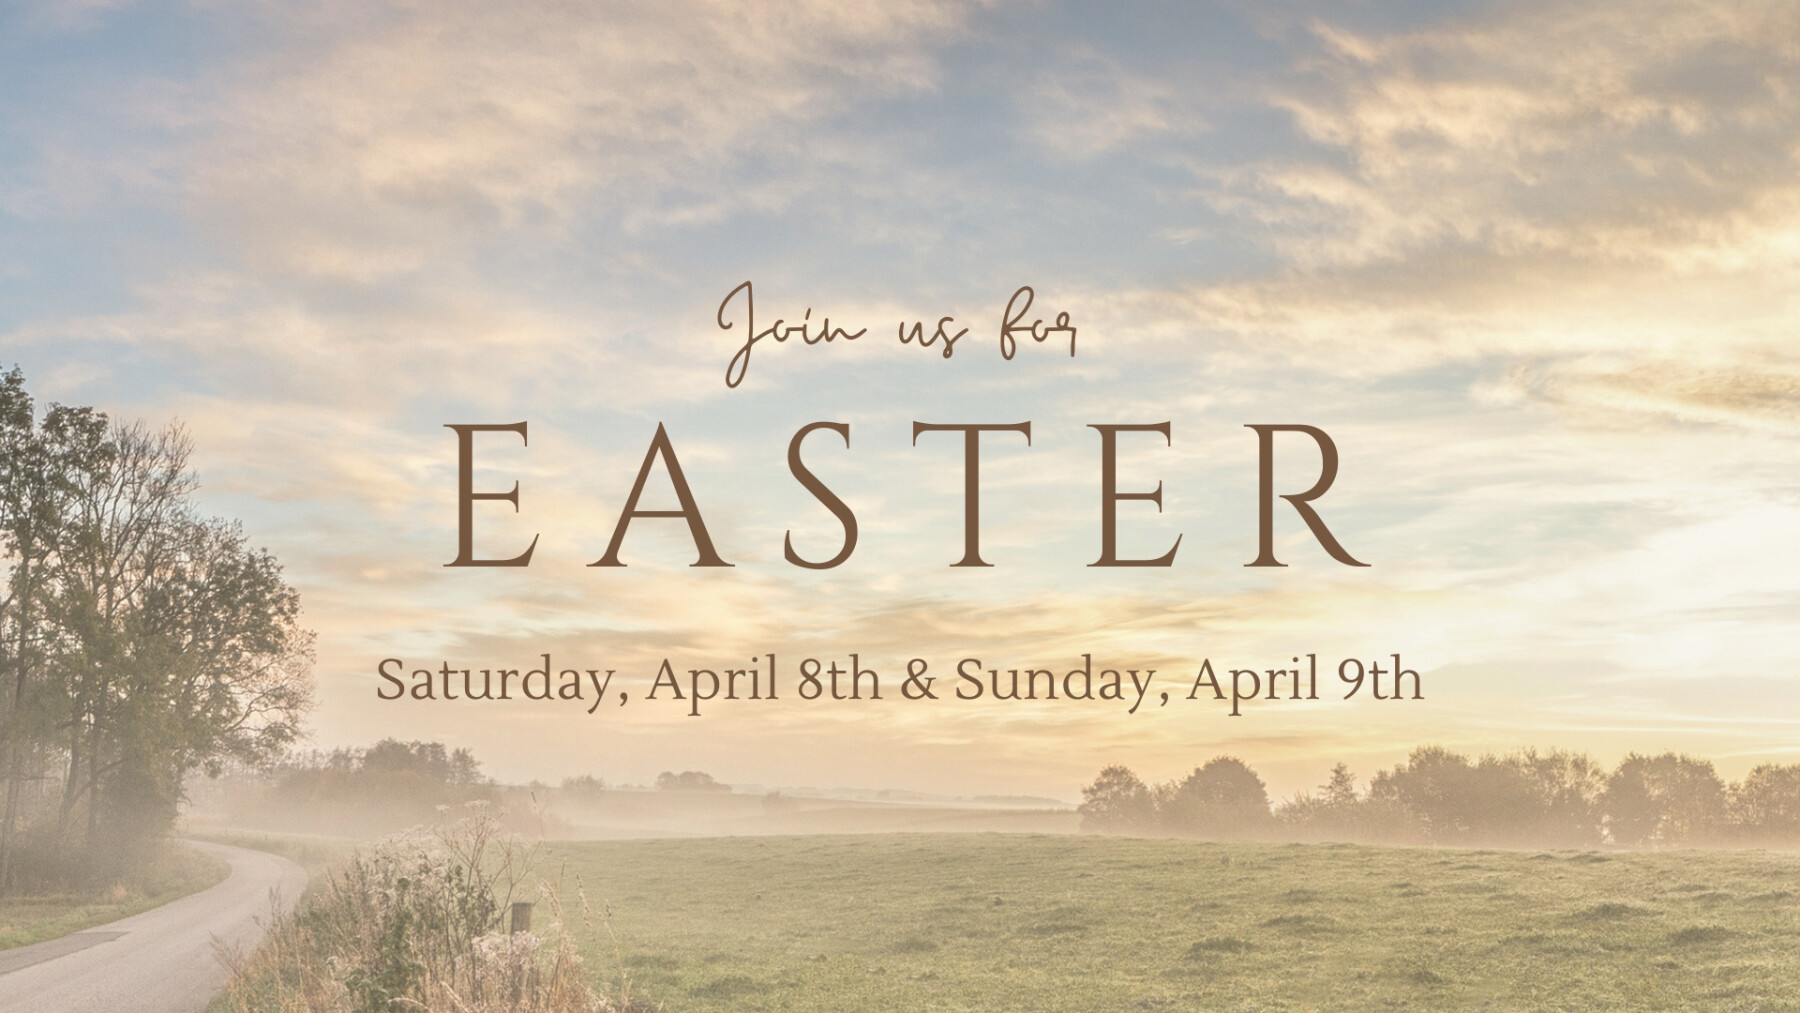 Easter Services - April 8th & 9th